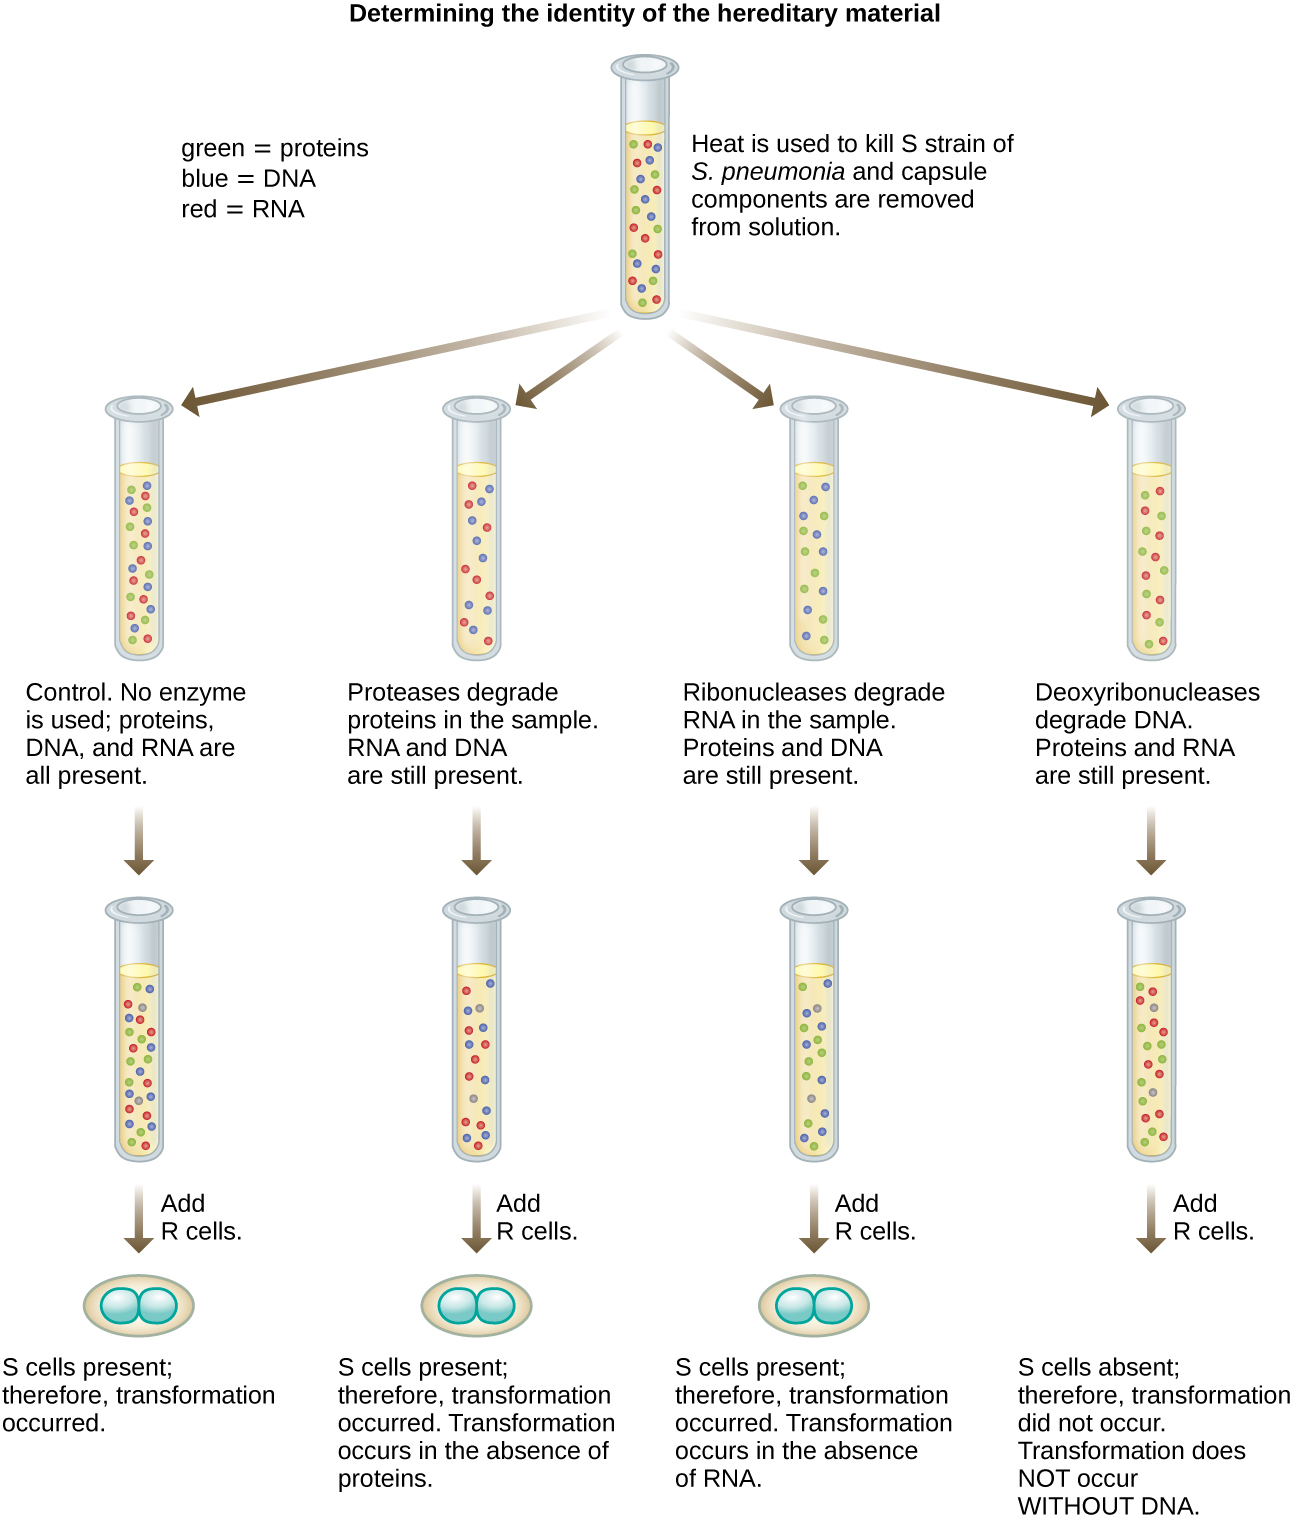 A diagram of Avery, MaLeod and McCarty’s experiment: Determining the identity of the hereditary material. Heat is used to kill S strain of S. pneumonia and capsule components are removed from solution. This produes a solution with DNA, RNA and proteins. This solution is then placed into 4 tubes. In the control, no enzymes are used so DNA, RNA, and proteins are all present. R cells are then added and S cells are found because transformation occurred. In the next experiment proteases degrade proteins in the sample, leaving DNA and RNA. R cells are added and S cells are found. Therefore, transformation occurred in the absence of proteins. In the next experiment ribonucleases degrade RNA in the sample, leaving DNA and proteins. R cells are added and S cells are found. Therefore, transformation occurred in the absence of RNA. In the final experiment deoxyribonucleases degrade DNA in the sample, leaving proteins and RNA. R cells are added and S cells are not found. Therefore, transformation does not occur without DNA. DNA is necessary for transformation.